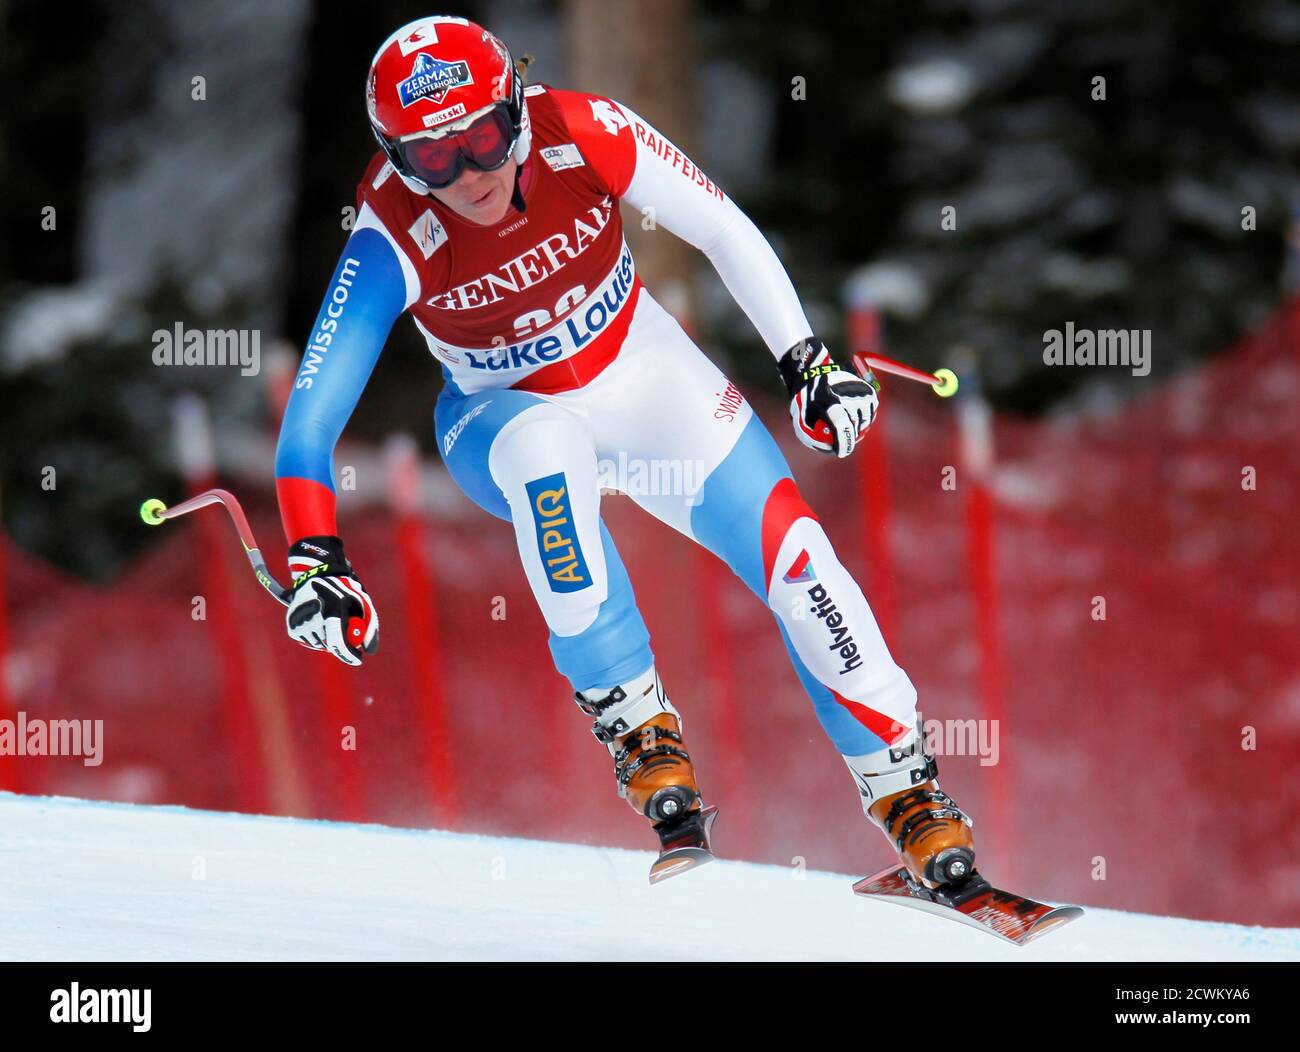 Fraenzi Aufdenblatten of Switzerland makes a turn during the Women's World Cup downhill alpine skiing race in Lake Louise, Alberta December 2, 2011.    REUTERS/Mike Blake     (CANADA - Tags: SPORT SKIING) Stock Photo